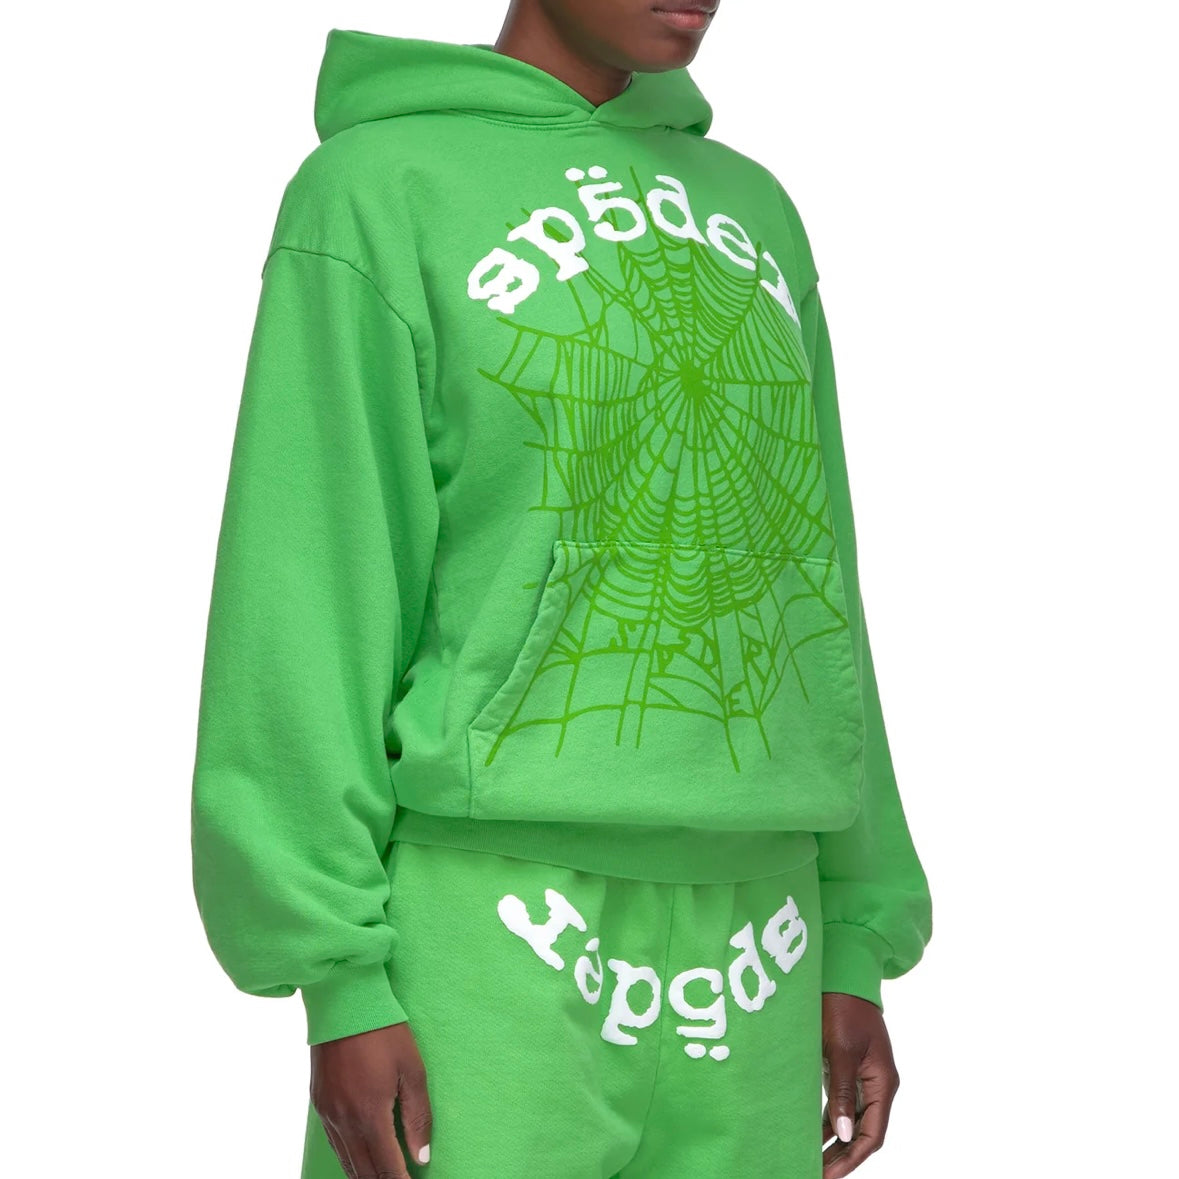 Sp5der Green White Legacy Hoodie On Body Front Right Female